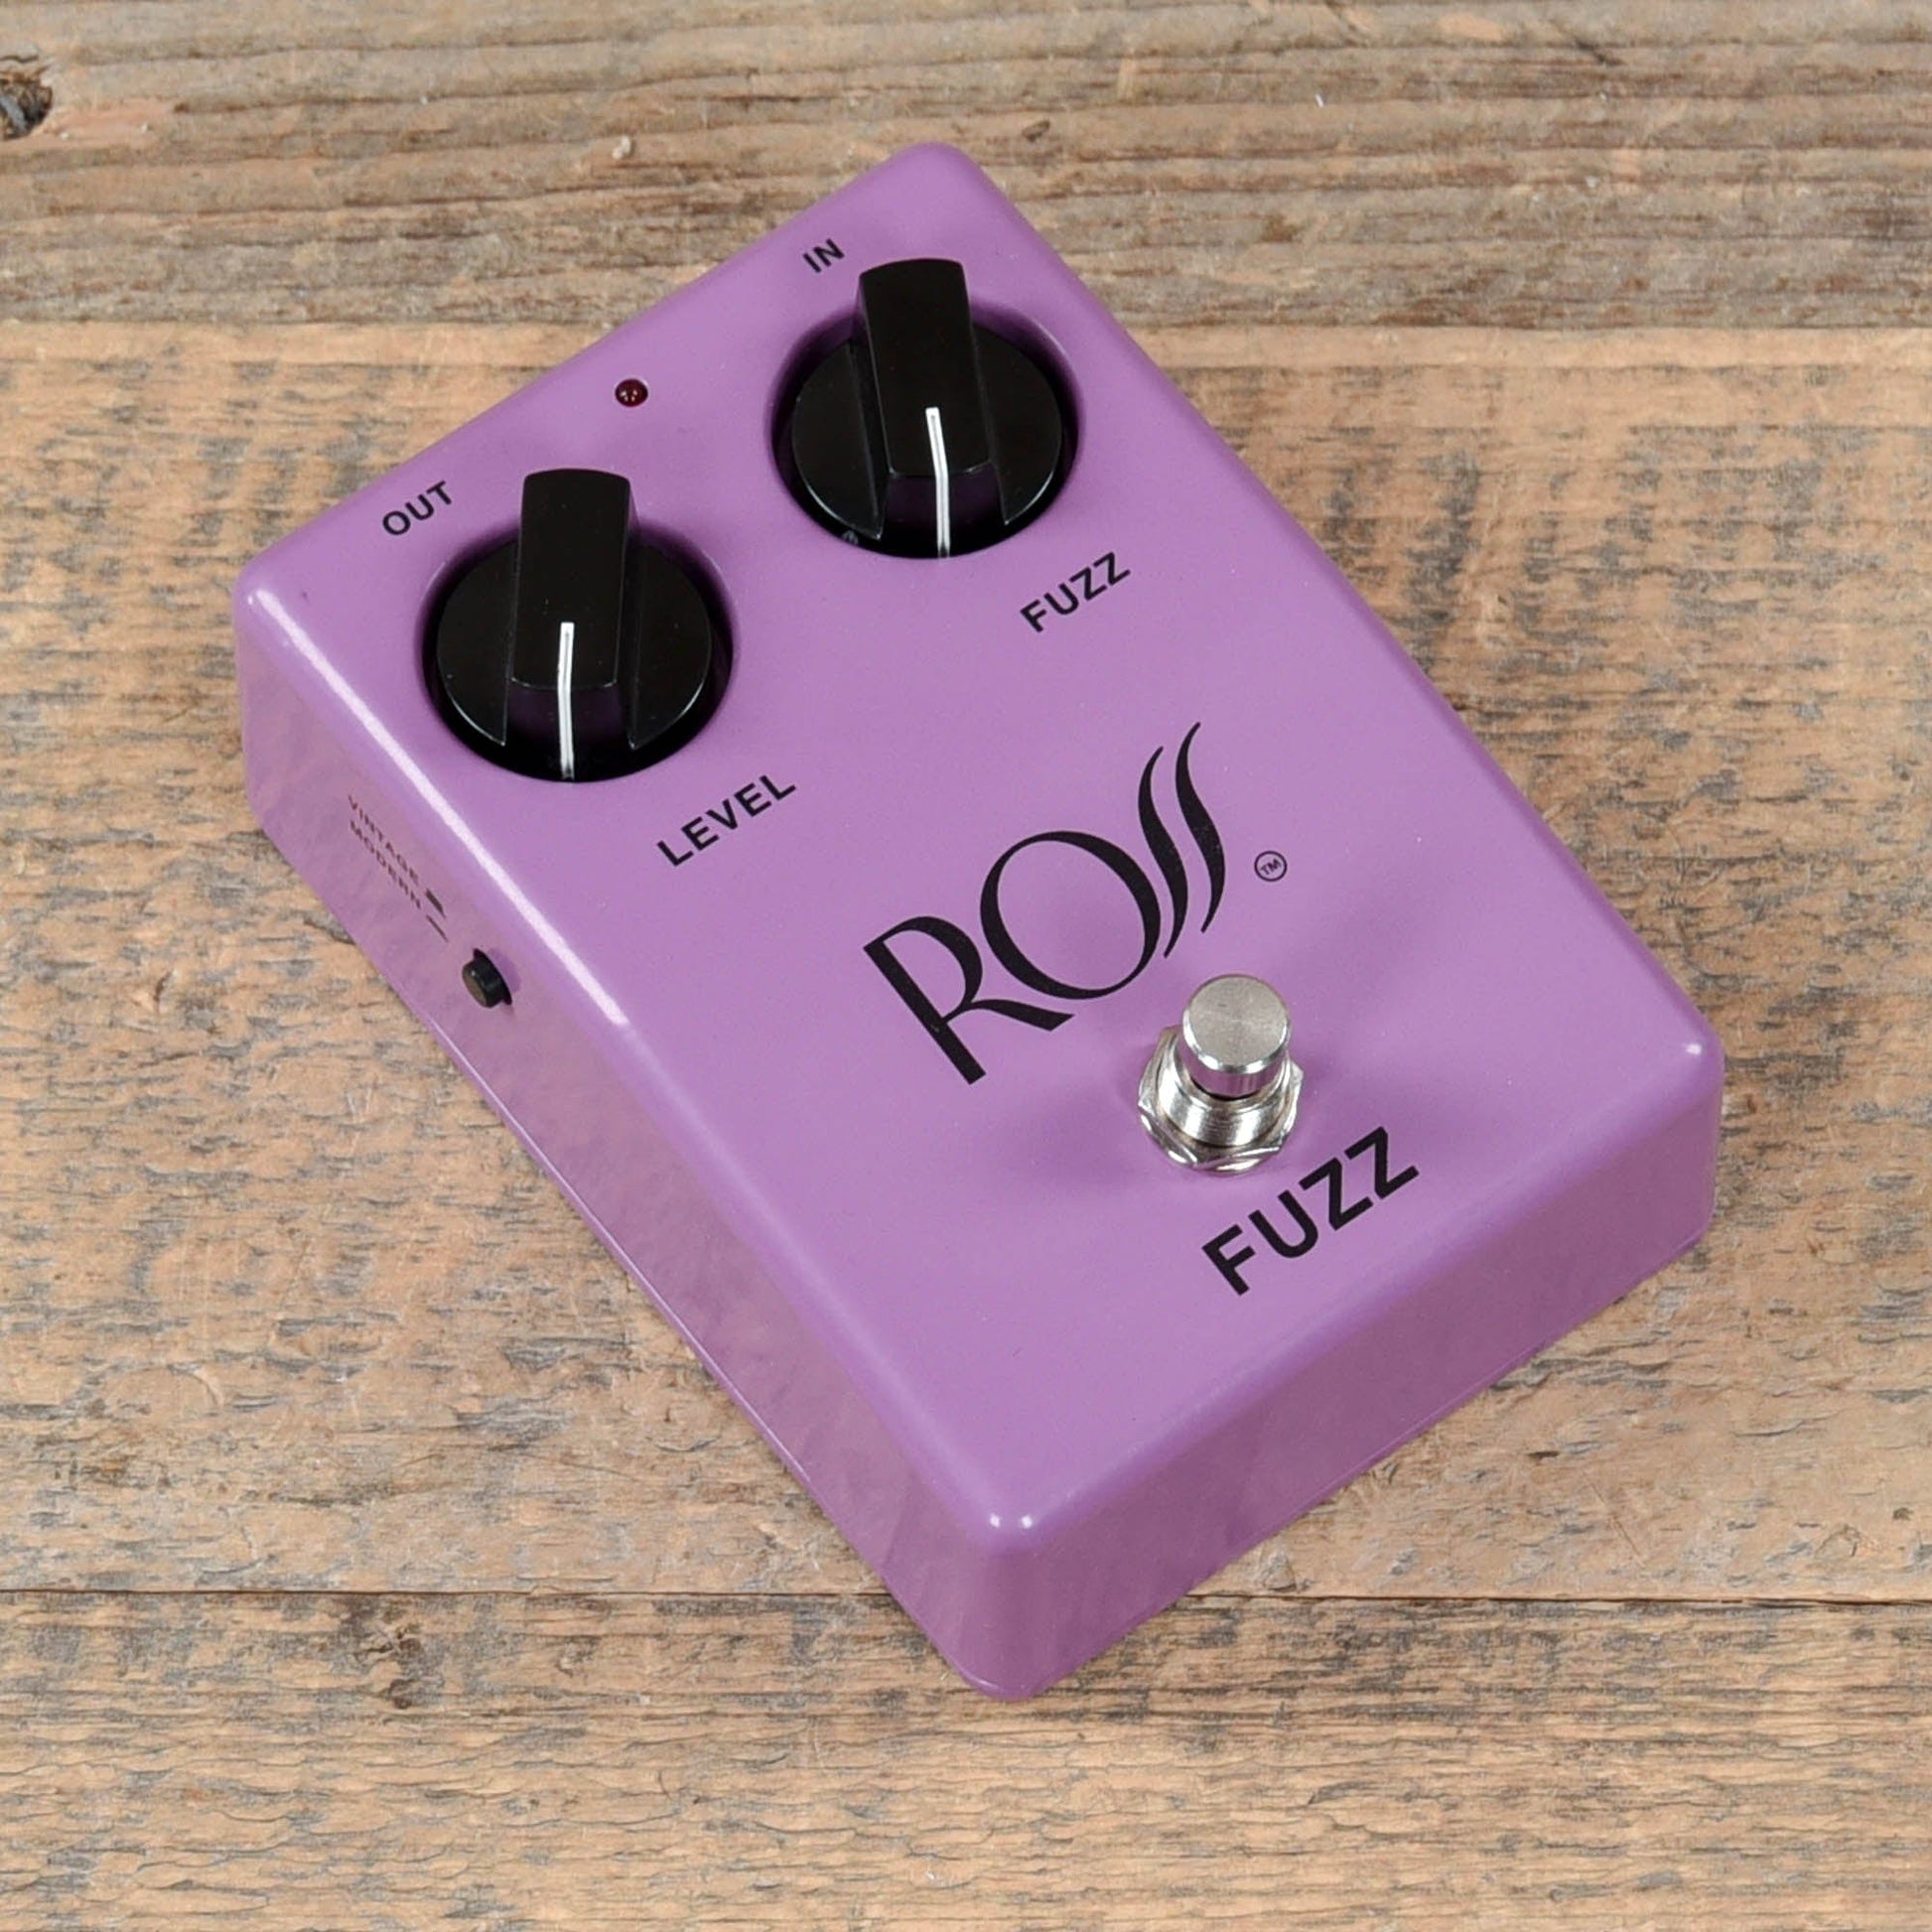 Ross Fuzz Pedal Effects and Pedals / Fuzz